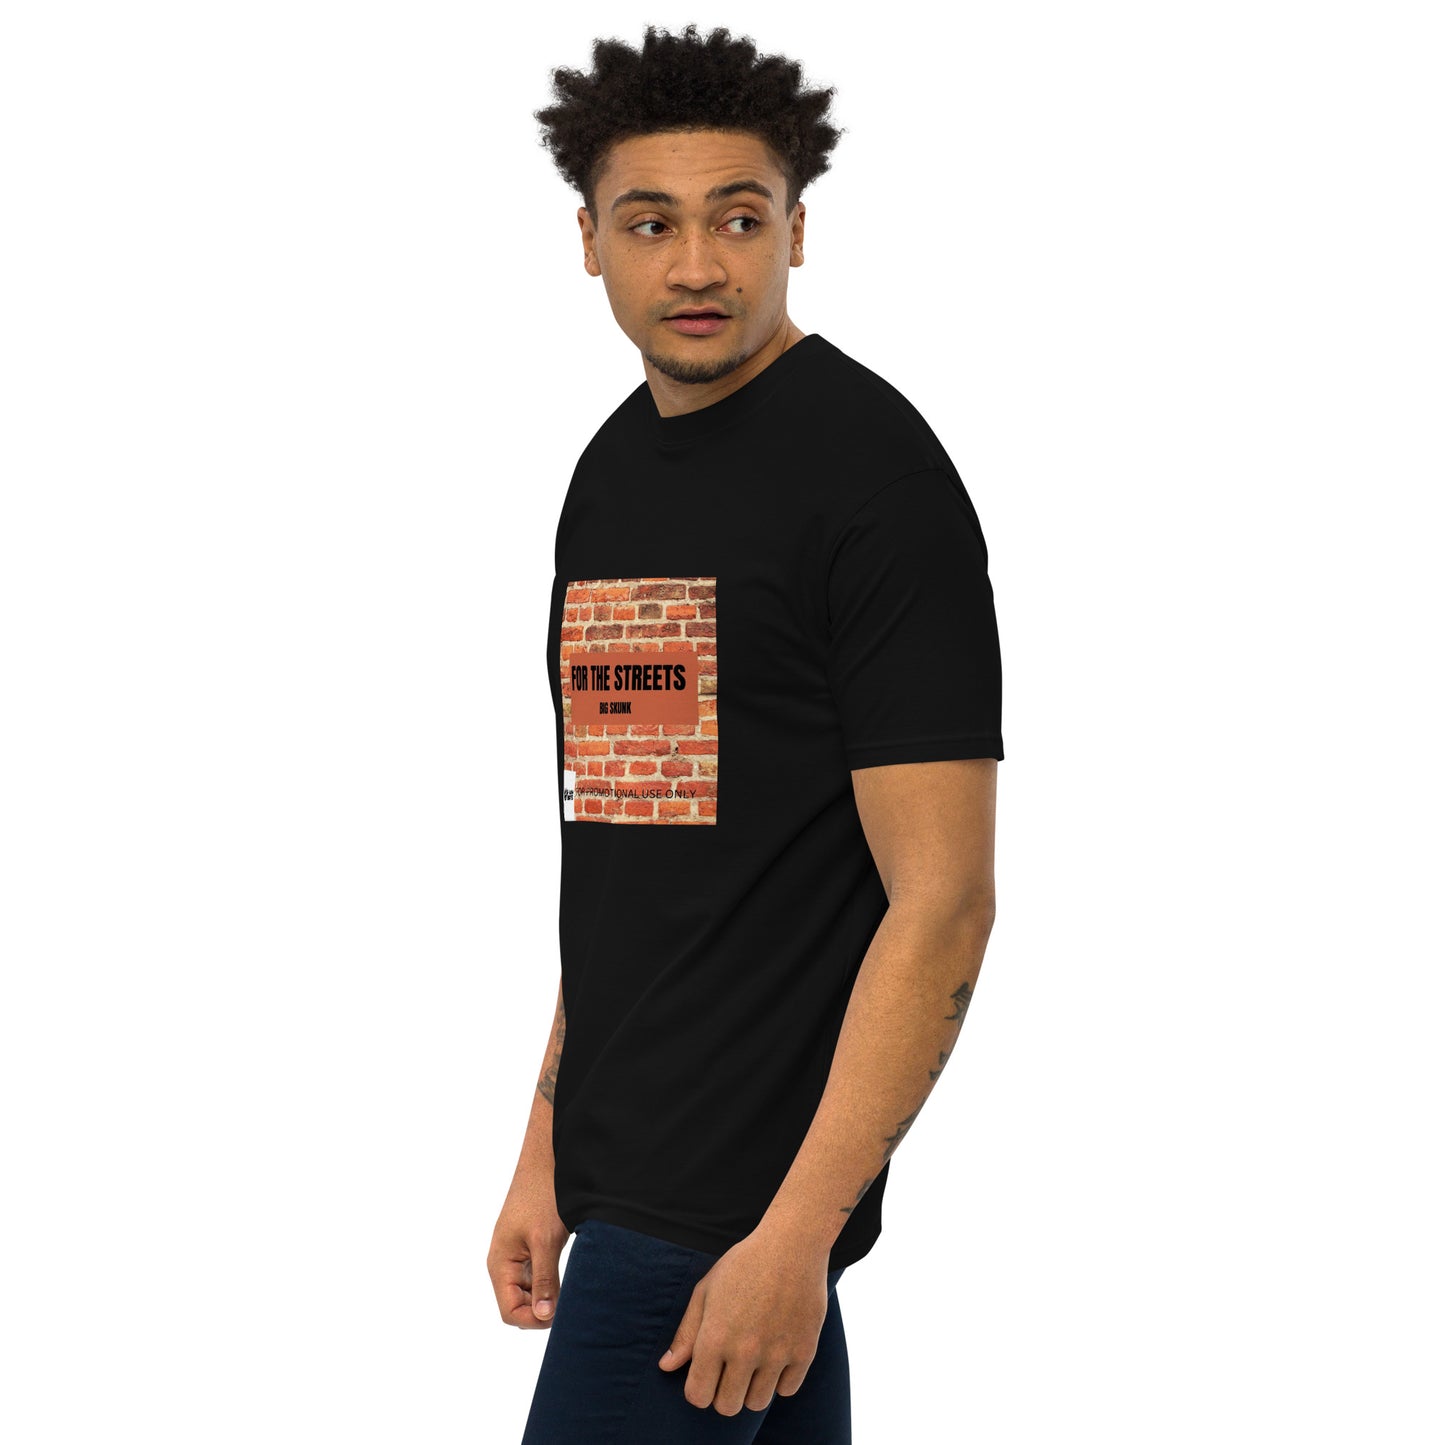 FOR THE STREETS Men’s premium heavyweight tee